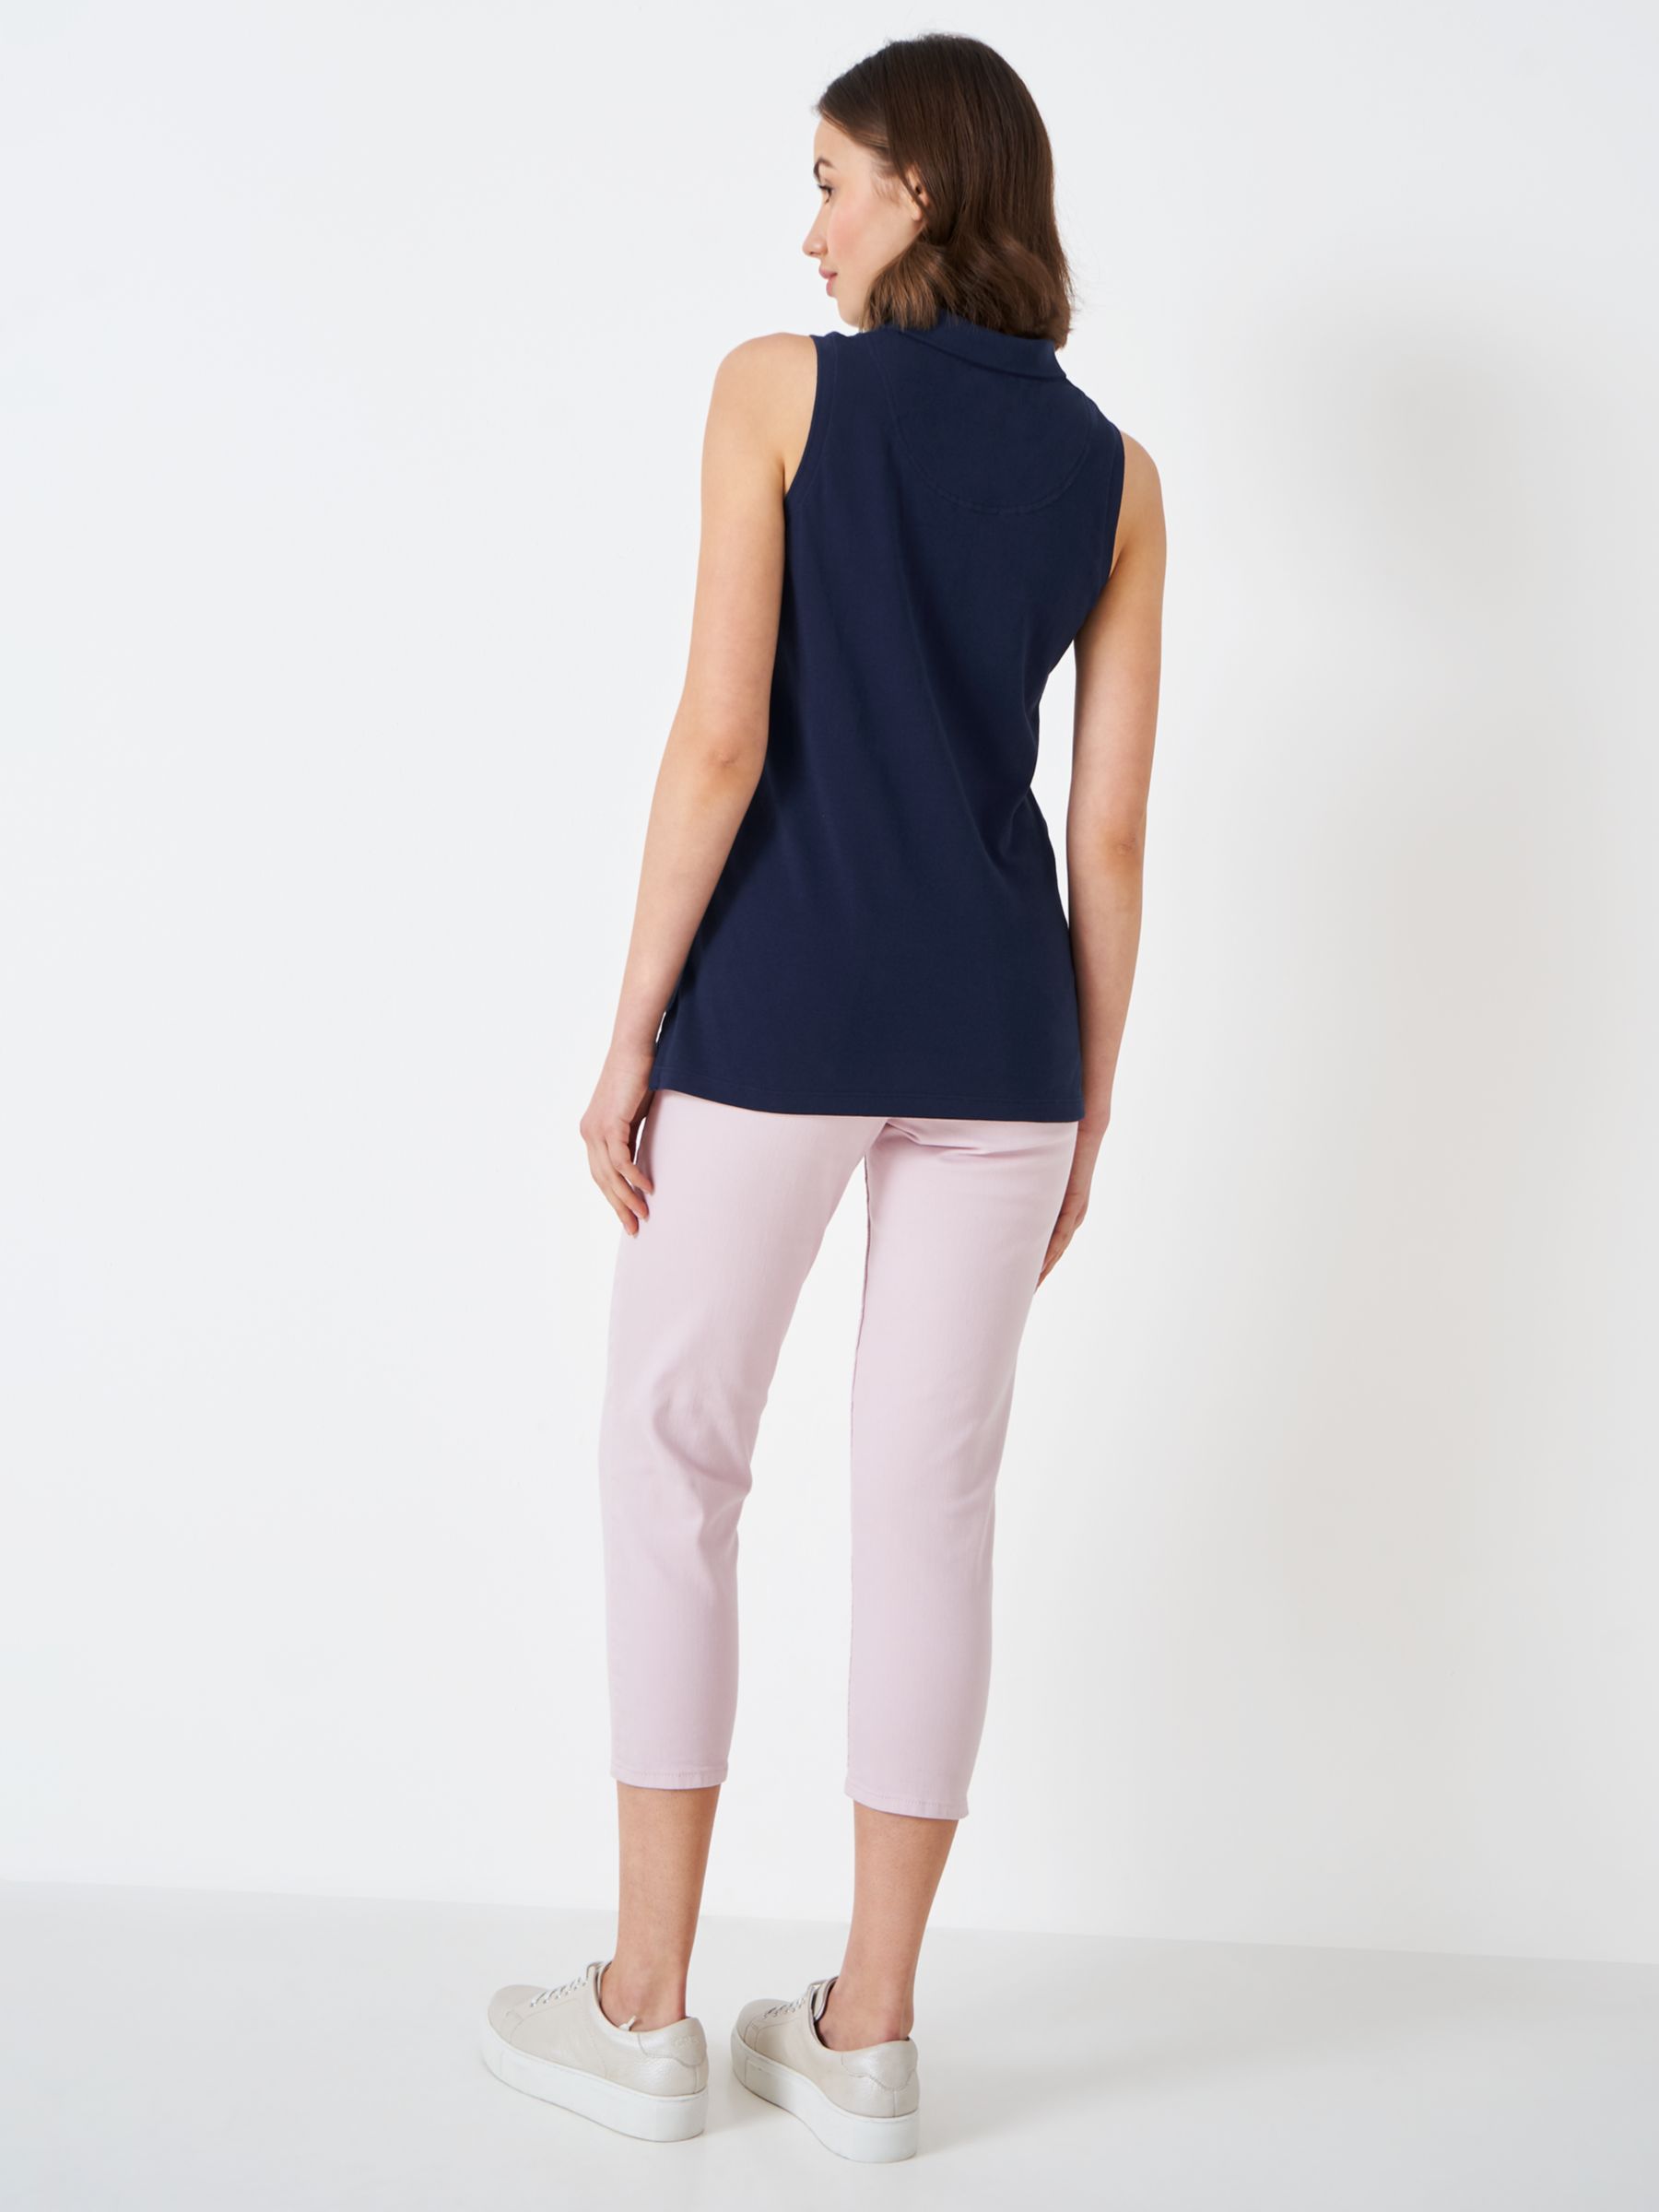 Buy Crew Clothing Sleeveless Polo Top, Navy Blue Online at johnlewis.com